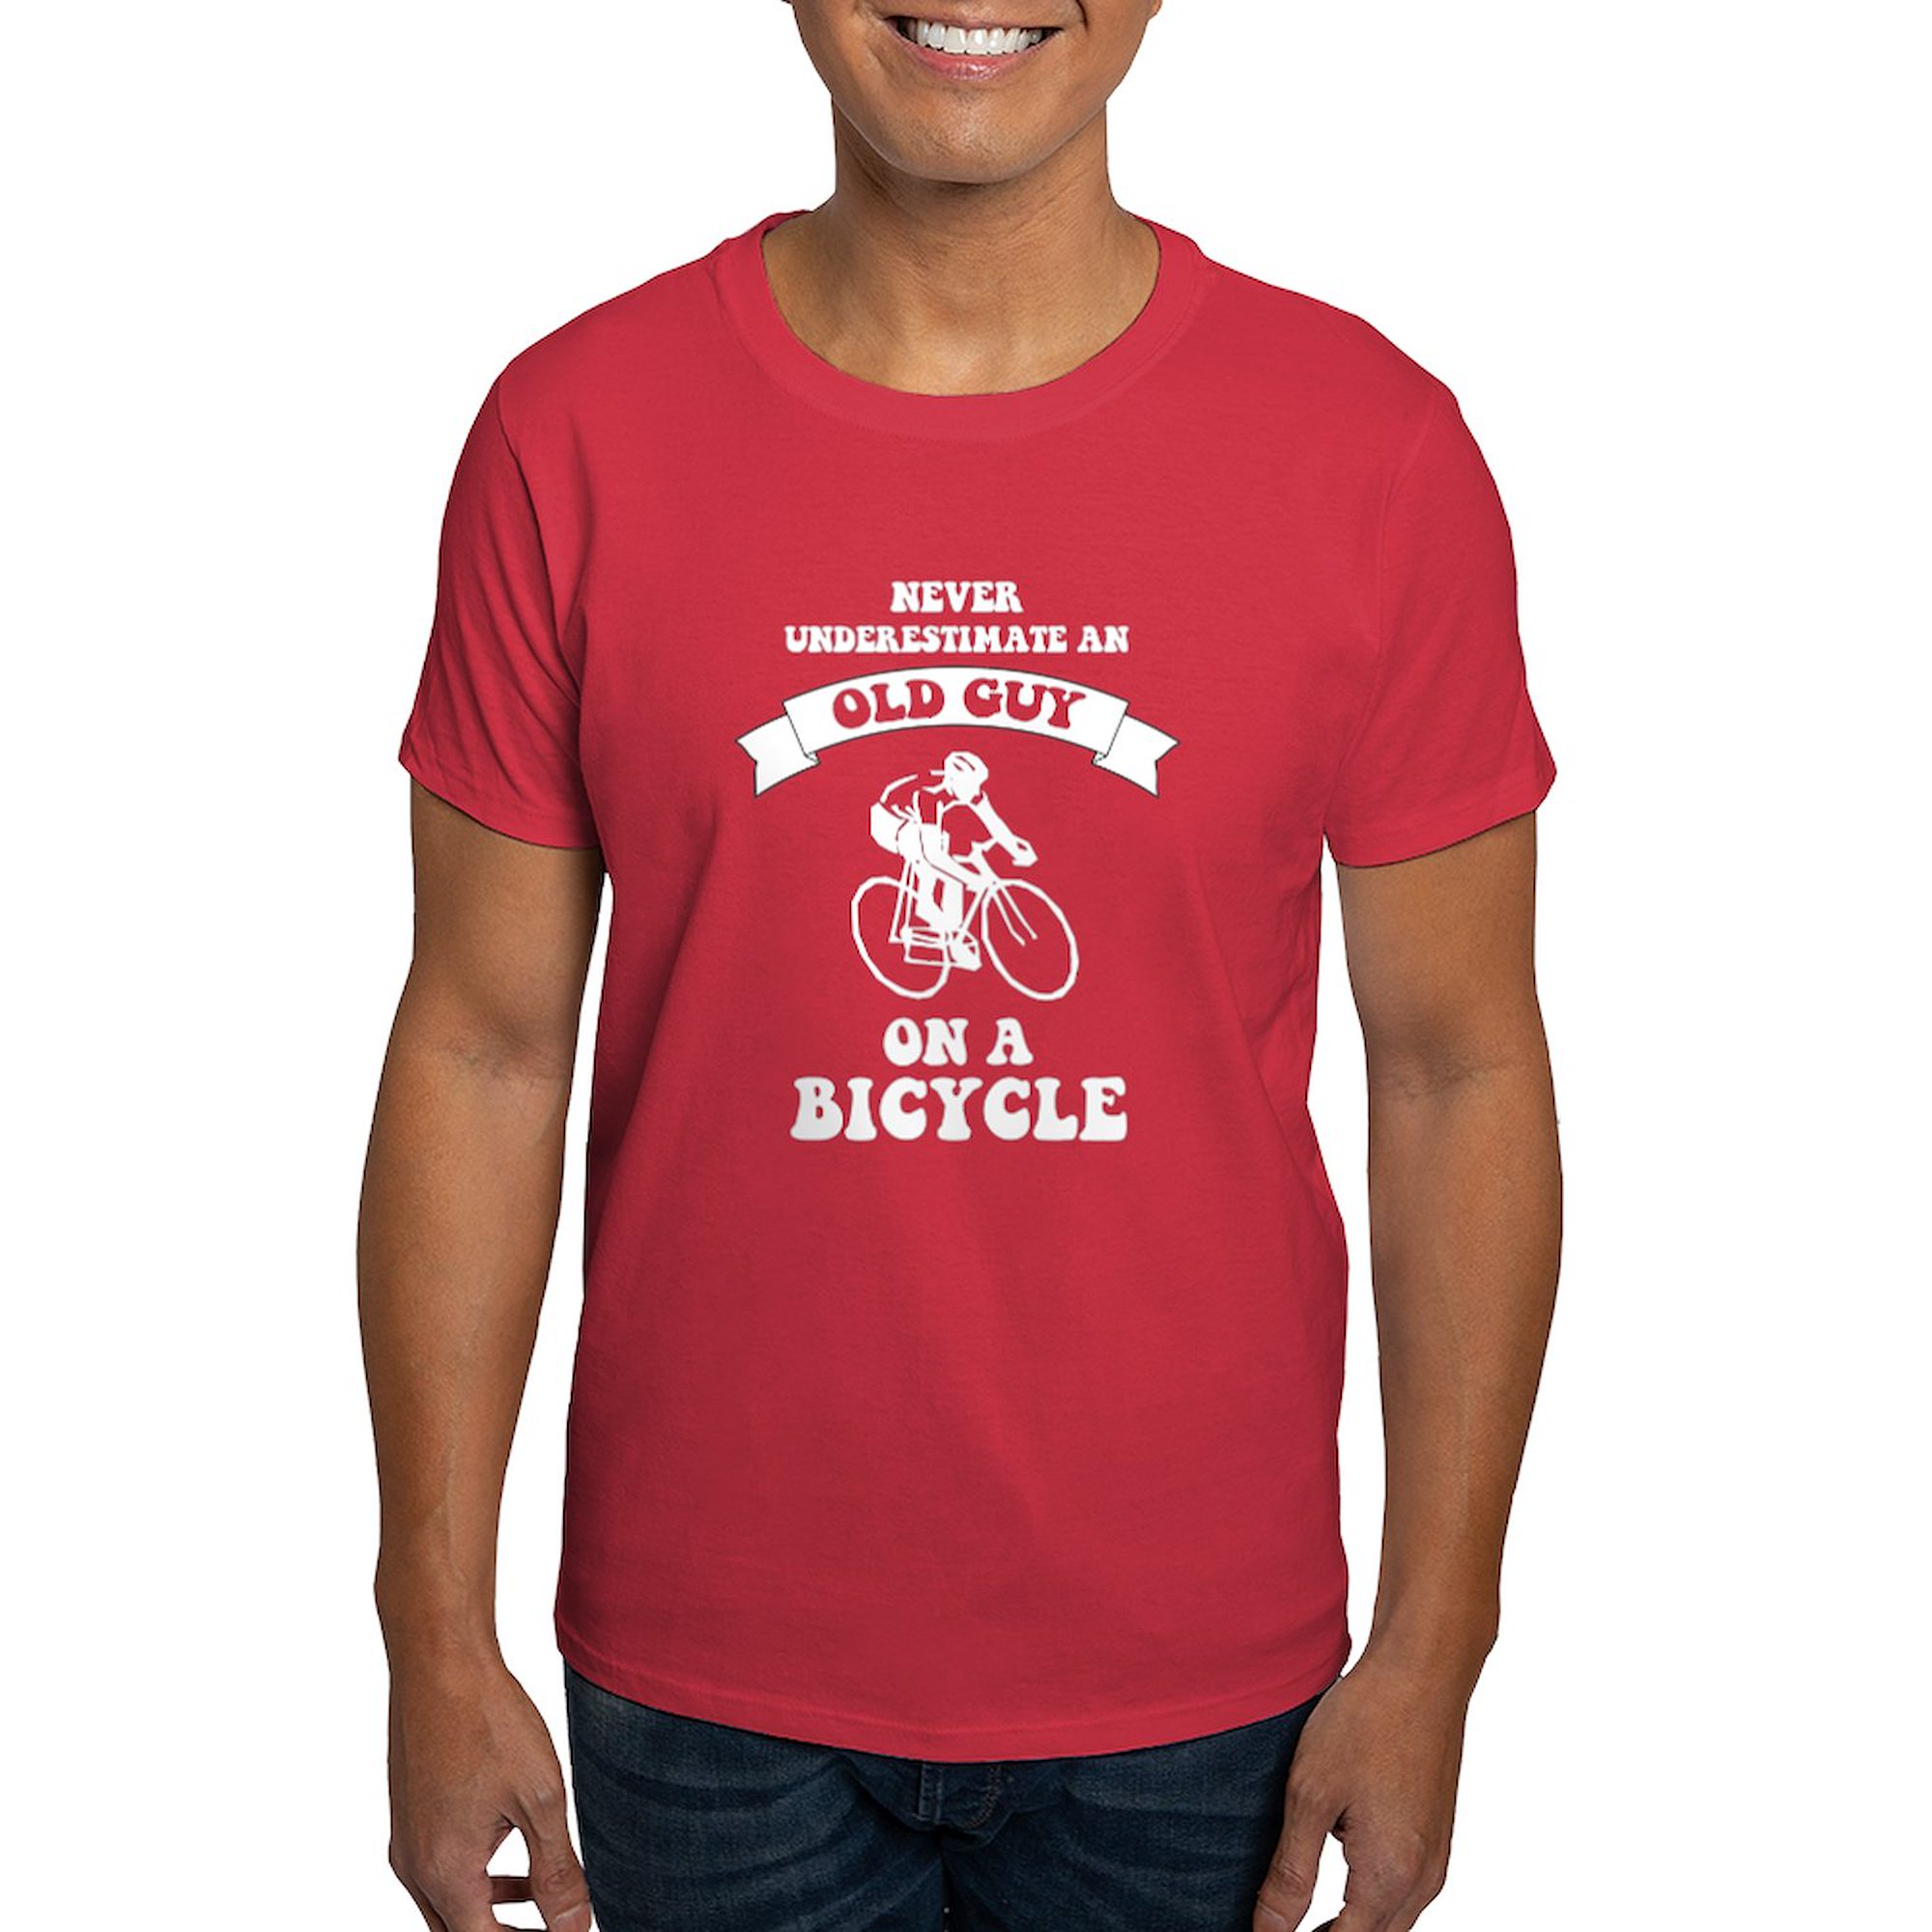 CafePress - Never Underestimate An Old Guy On A Bicycl T Shirt - 100% Cotton T-Shirt - image 1 of 4